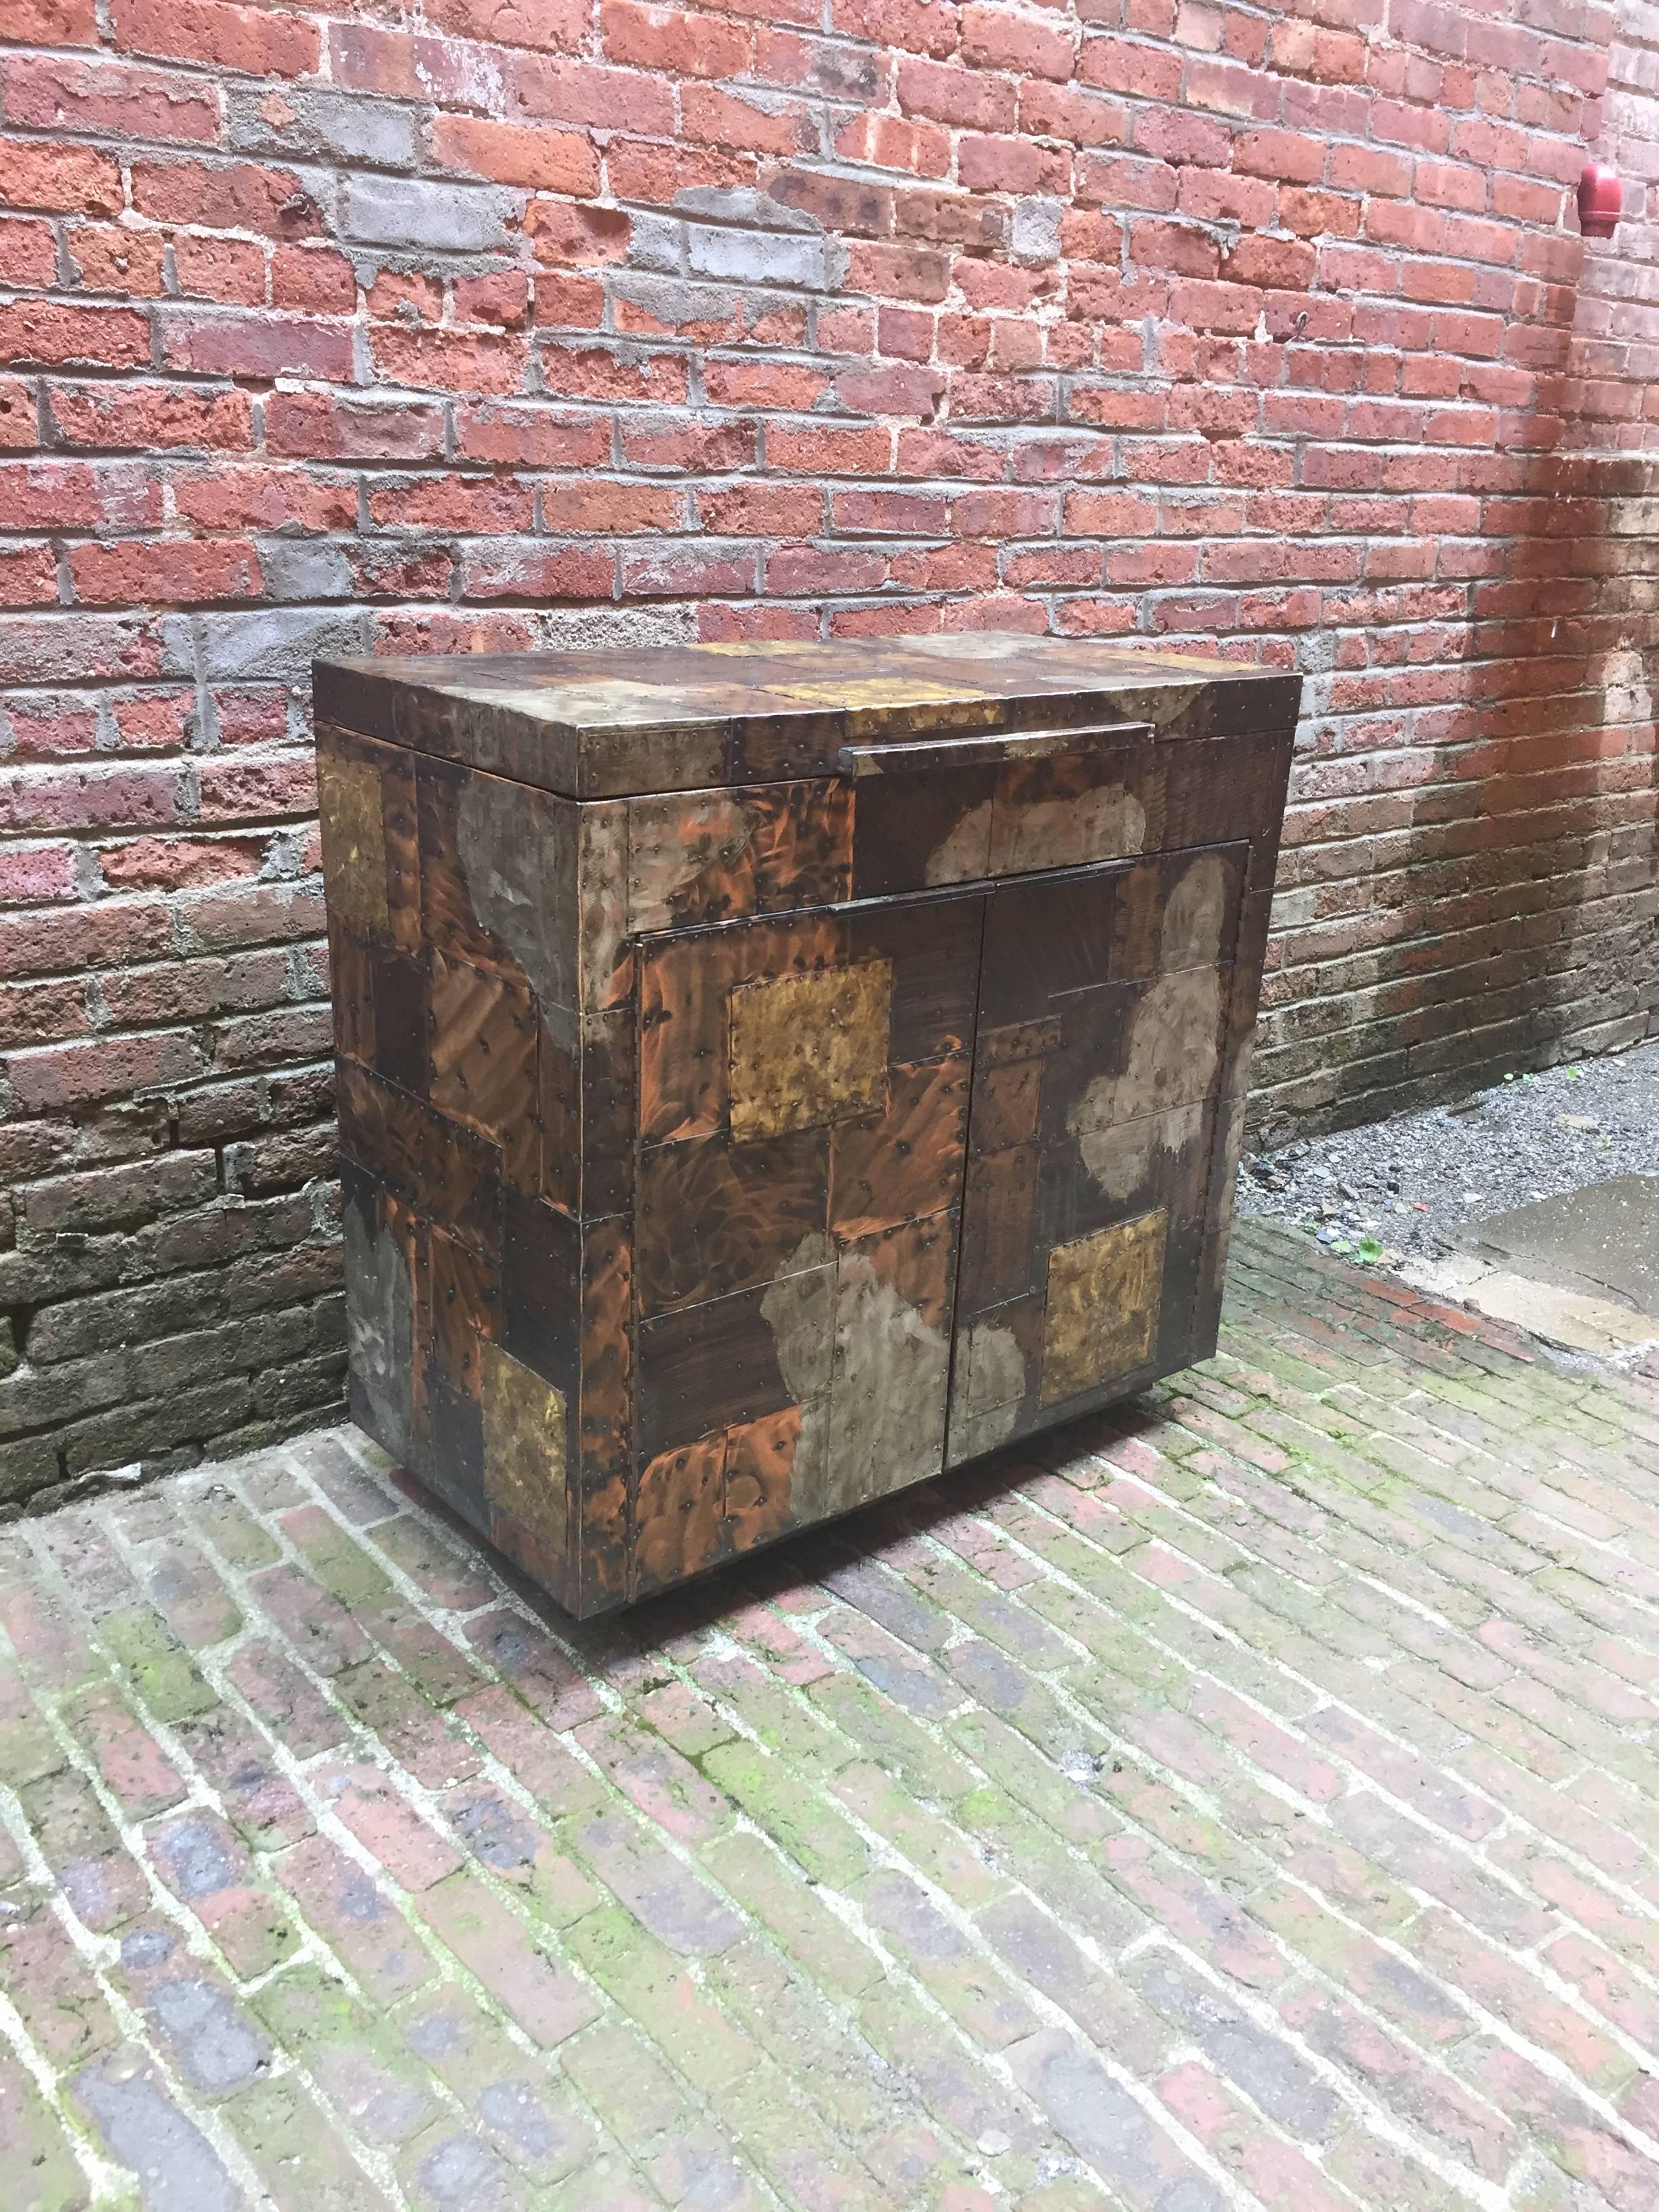 Designed by Paul Evans for Directional. Patchwork mixed metals cabinet consisting of Copper, Brass and Pewter. Black interior with flip-top and two cabinet doors with shelves. On casters, circa 1971.

Measures: 36.25